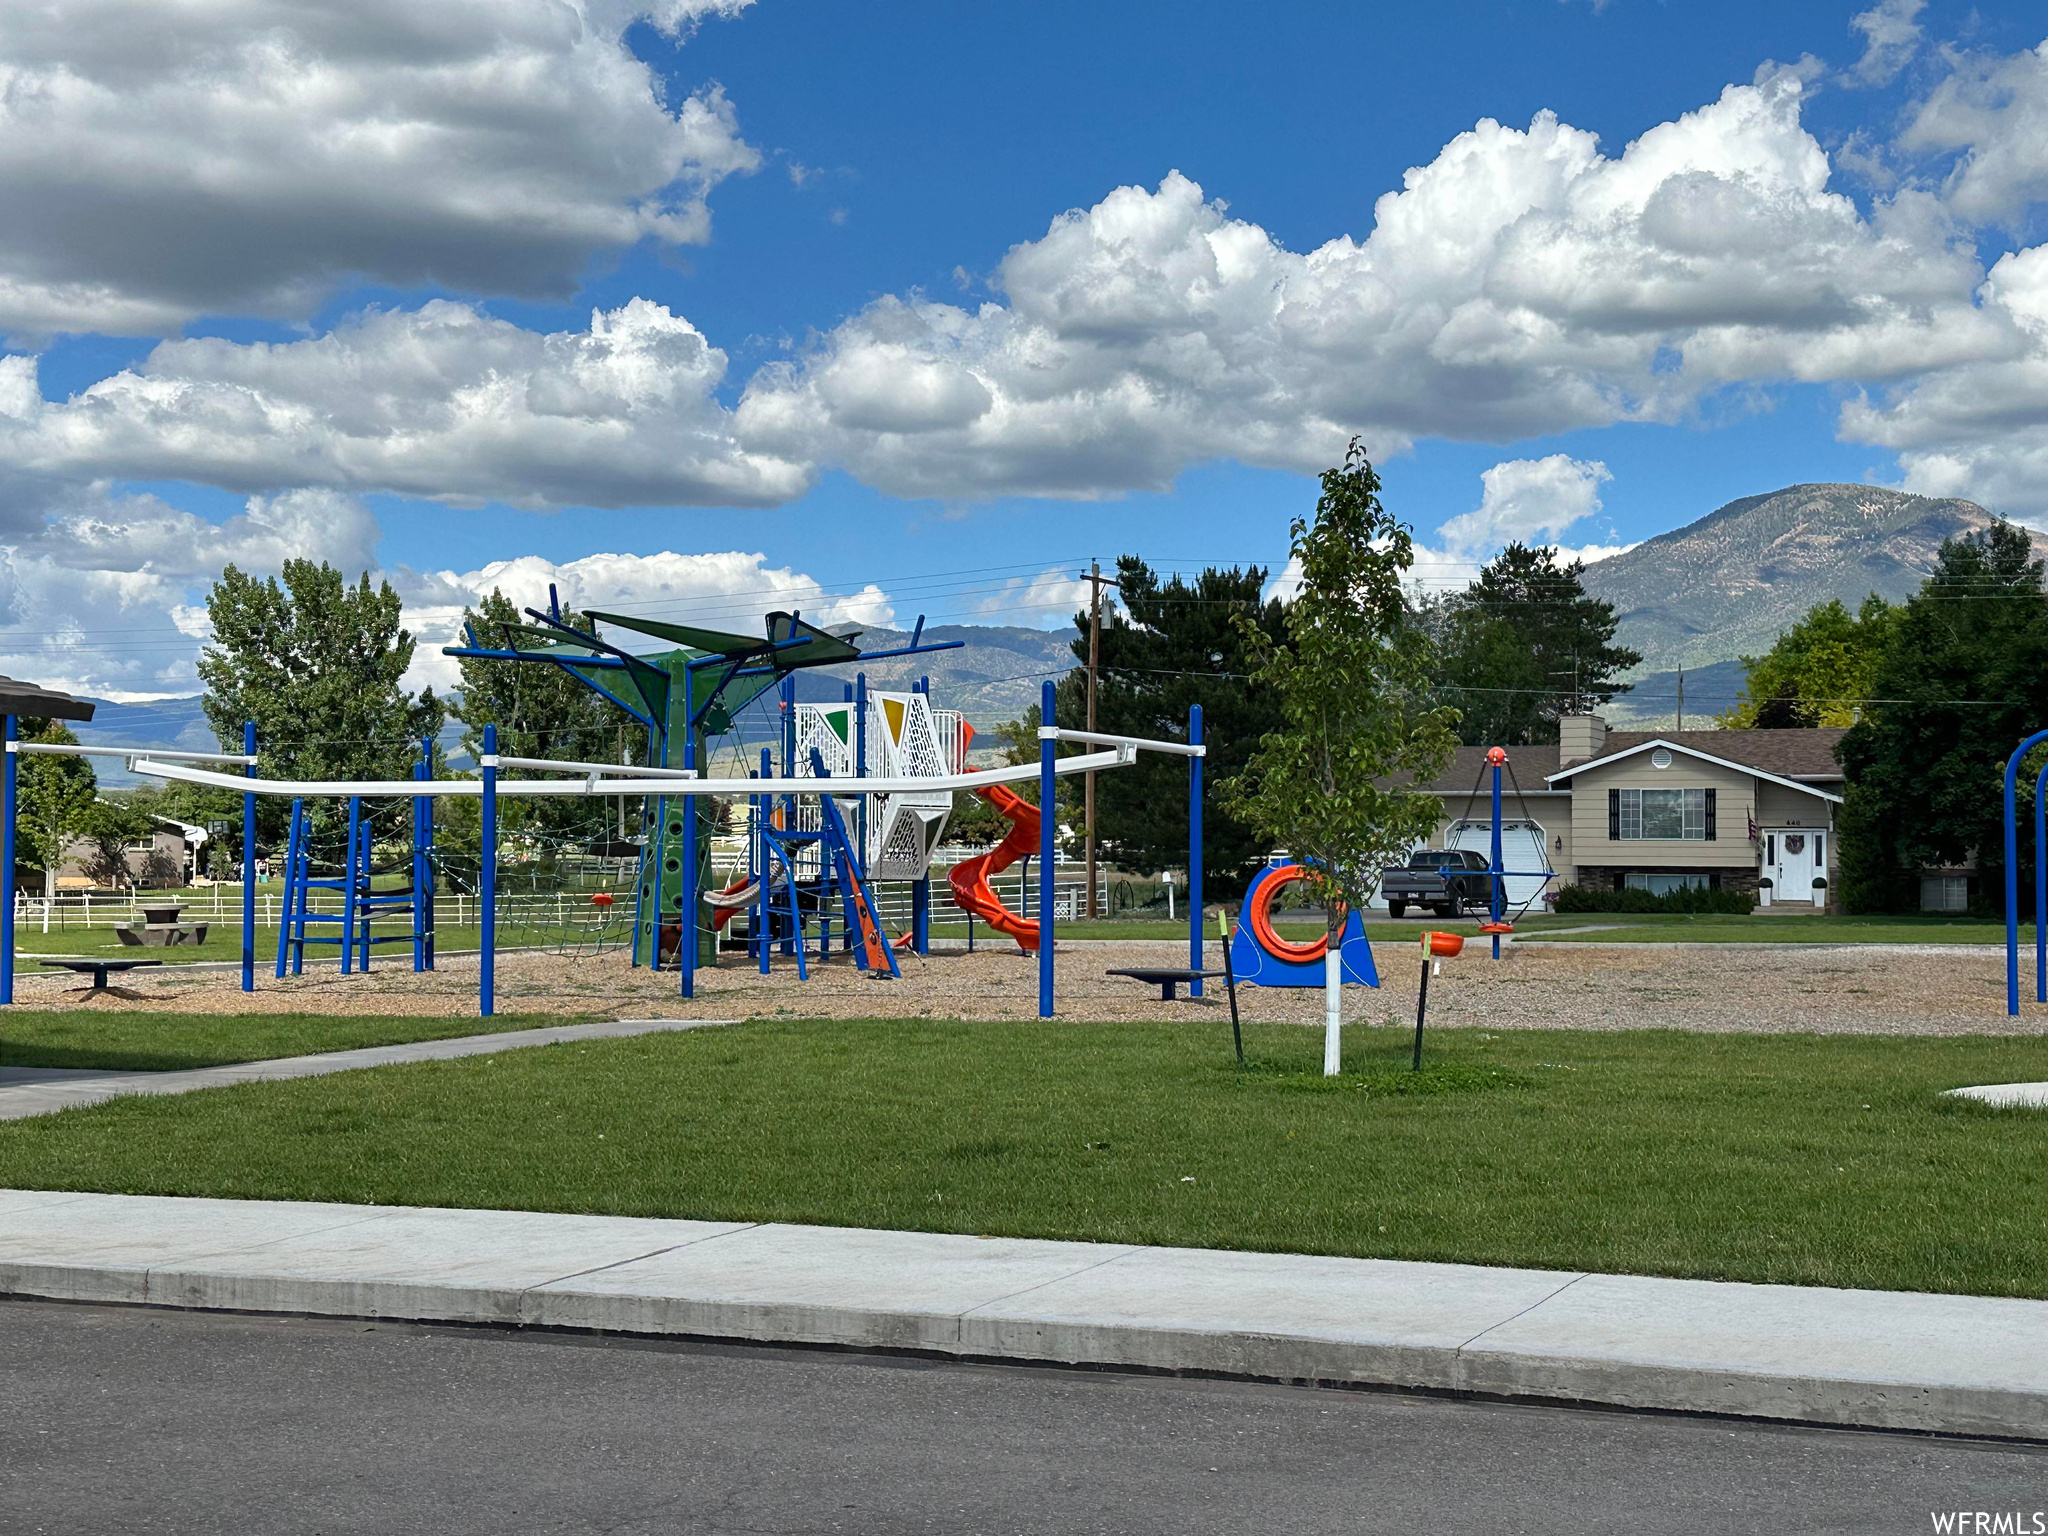 View of jungle gym with a lawn and a mountain view